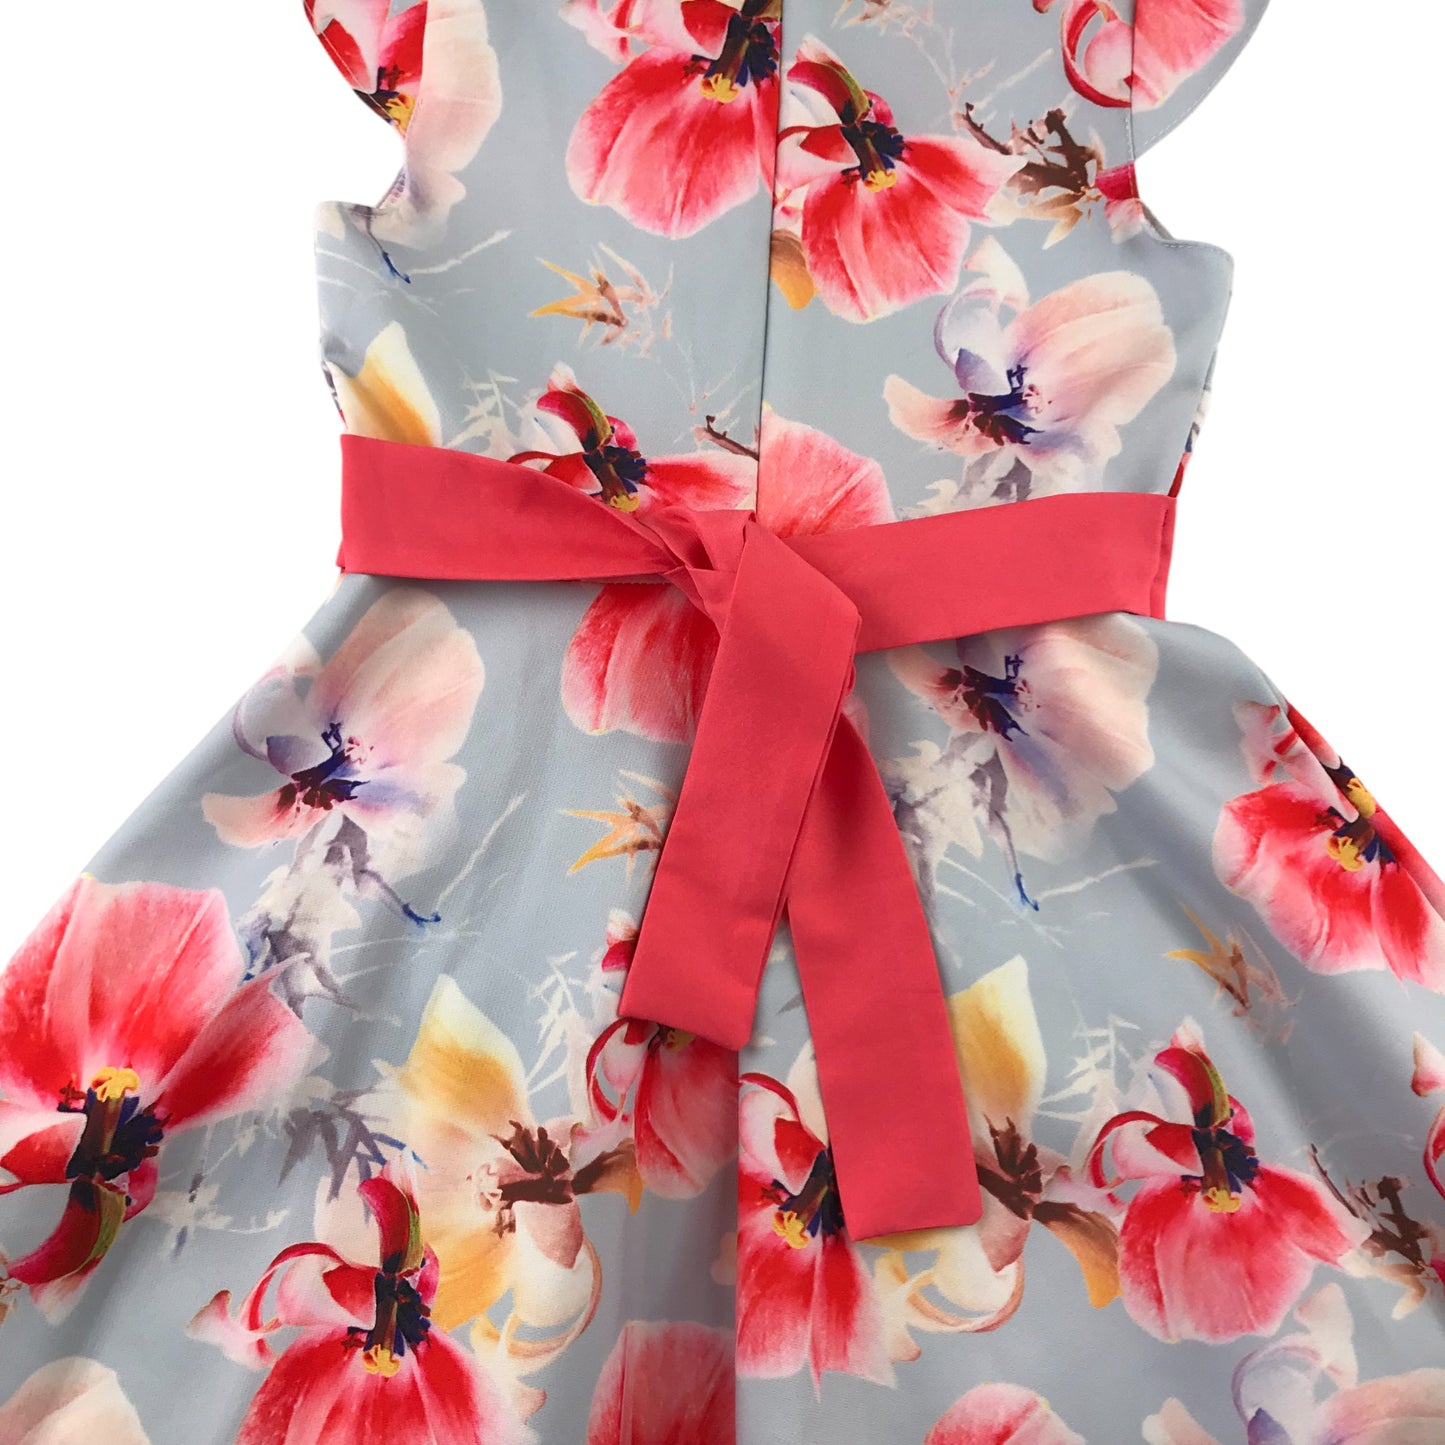 Blue floral dress 5-6 years pink flower print pattern and belt